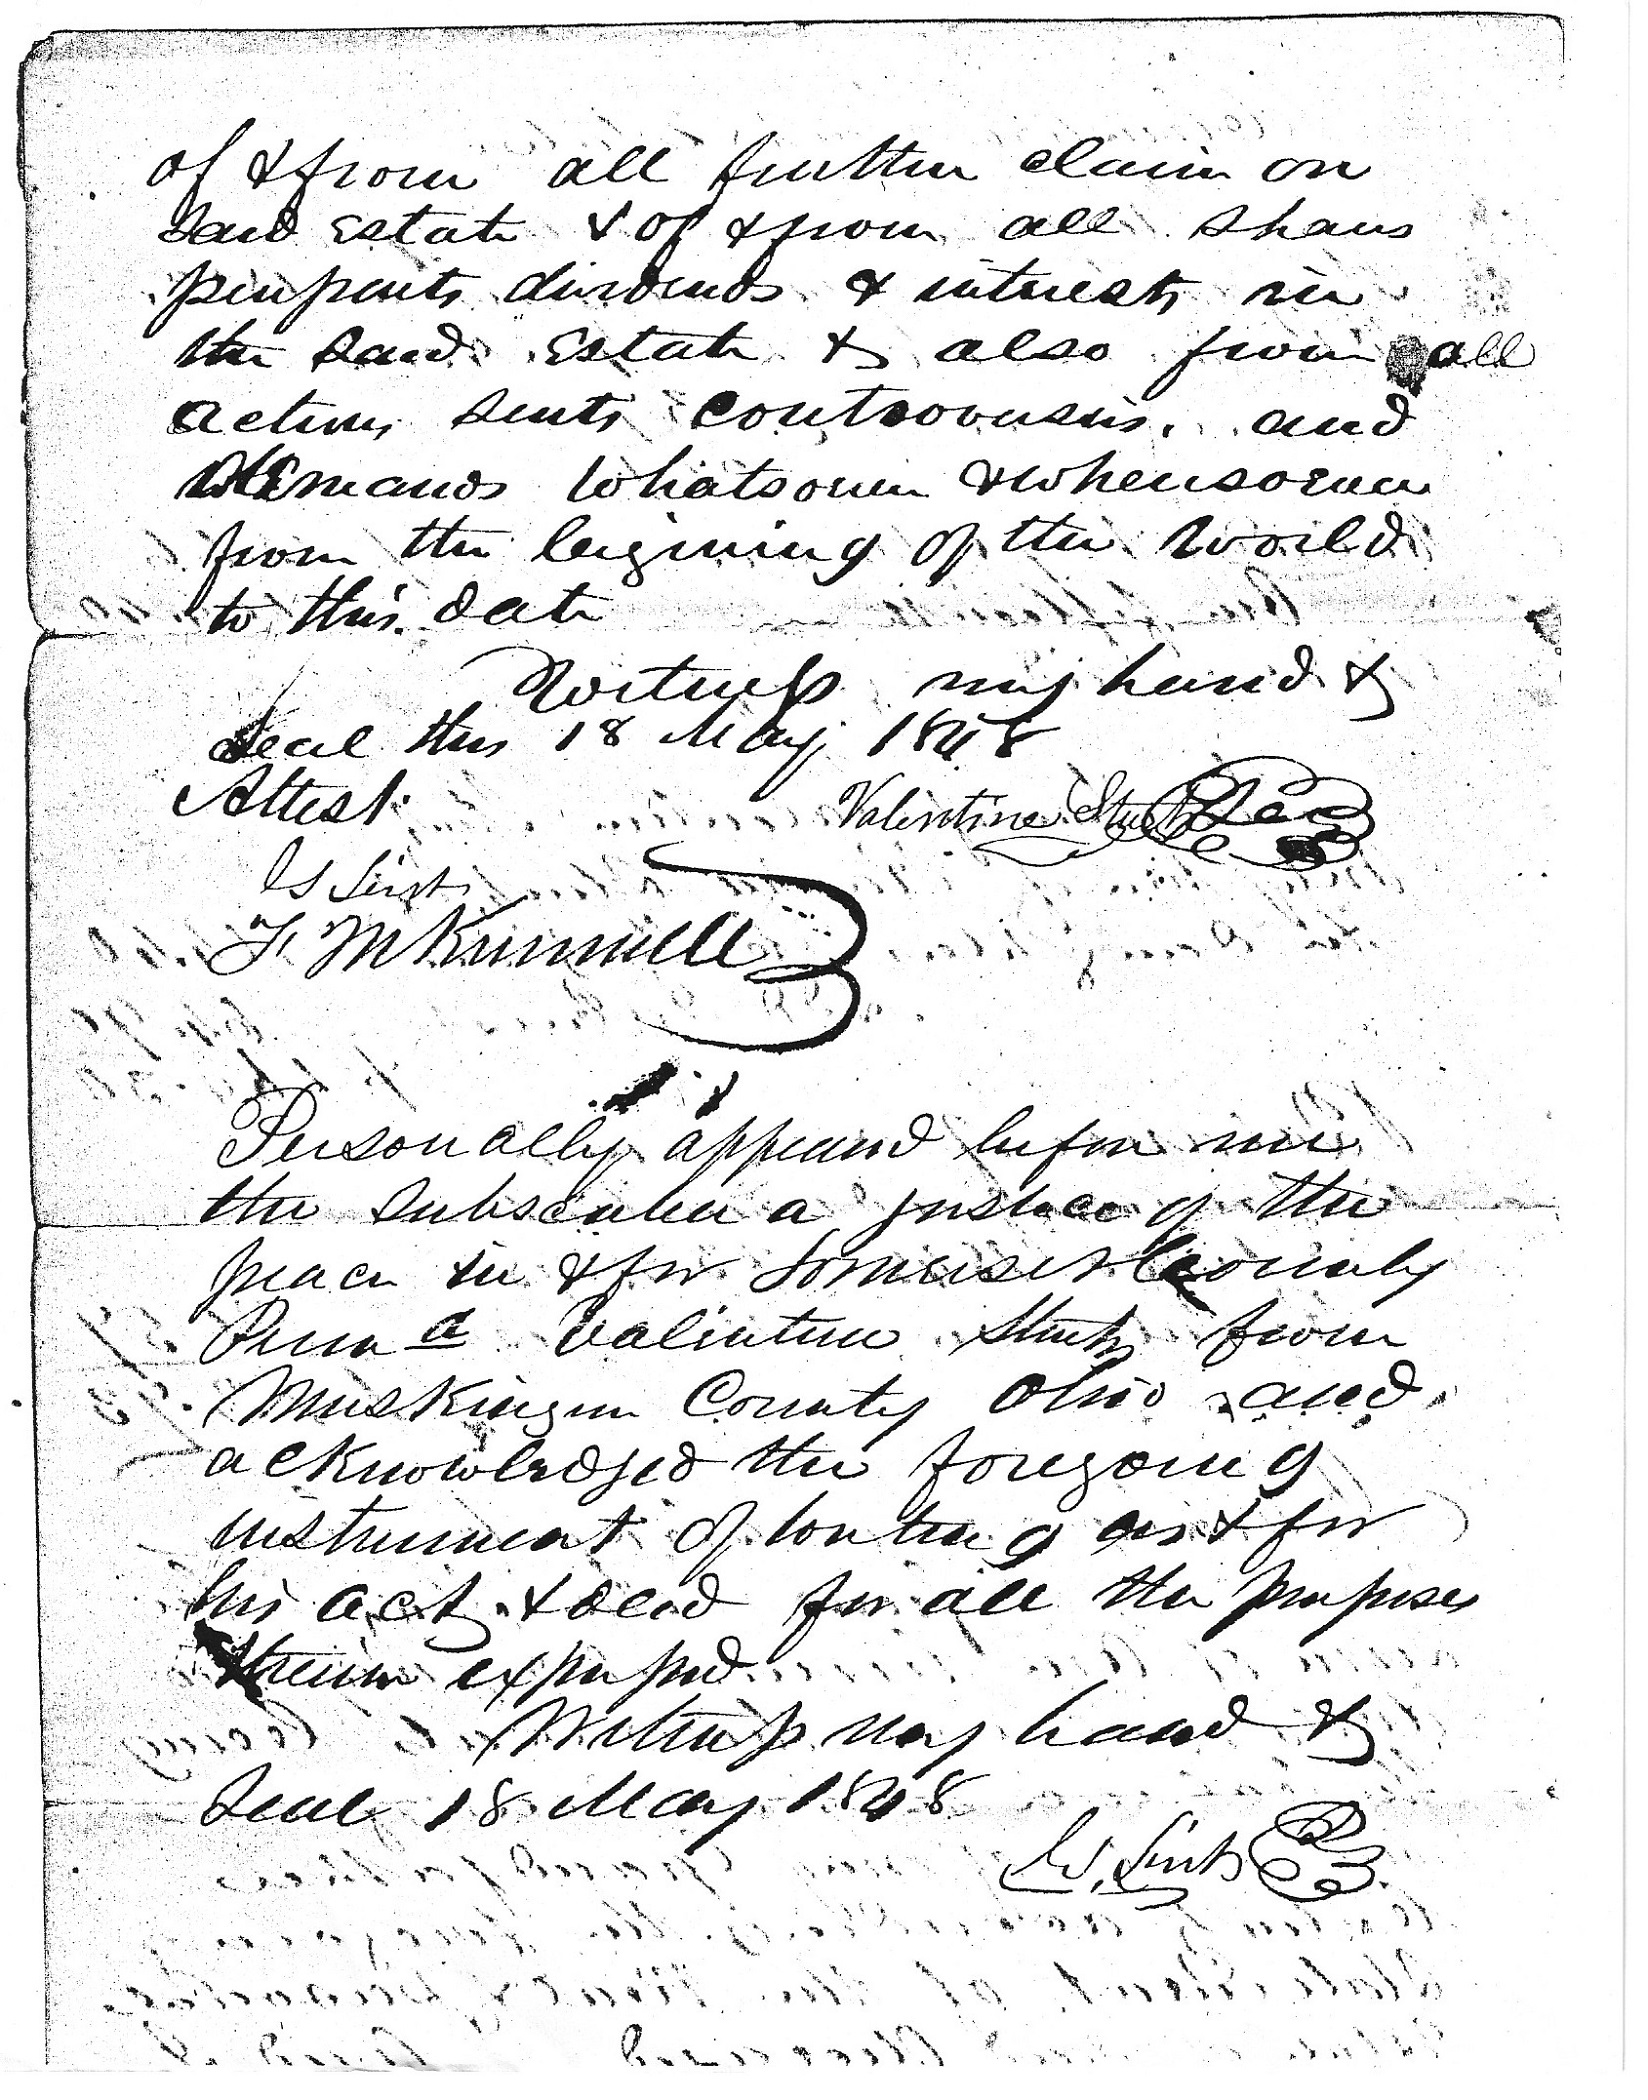 Page 2 of the doc pertaining to the estate of Christian Sturtz, Jr. of Somerset County, Pennsylvania.